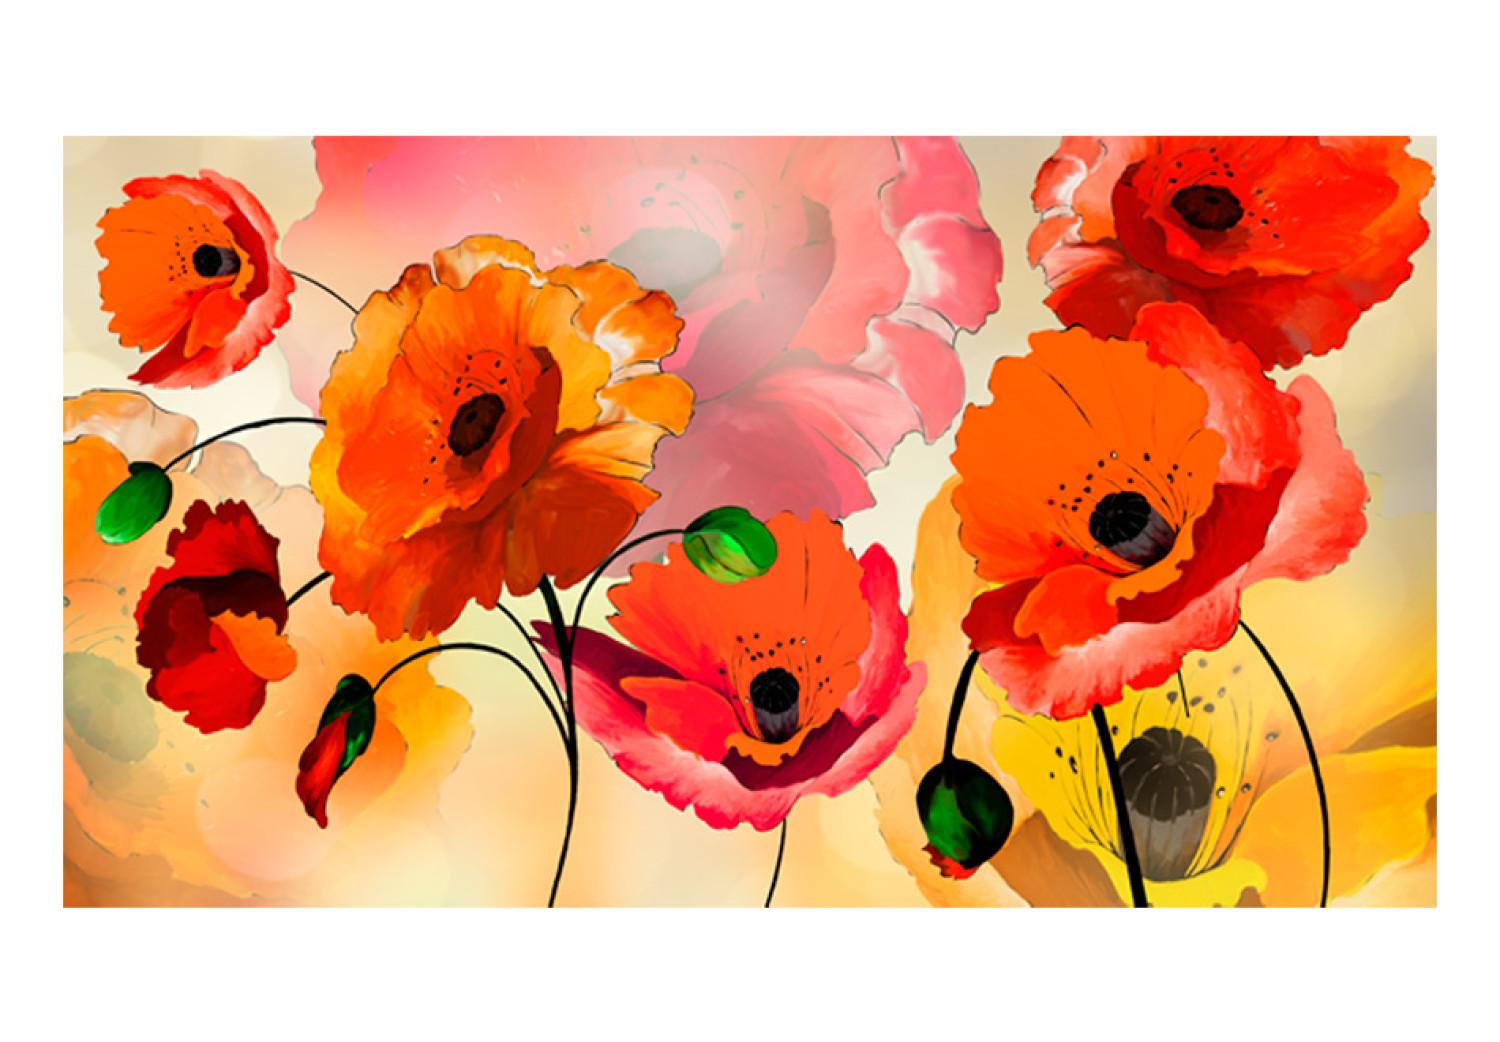 Wall Mural Velvety Poppies - Abstraction of Energetic Flowers on a Bright Background